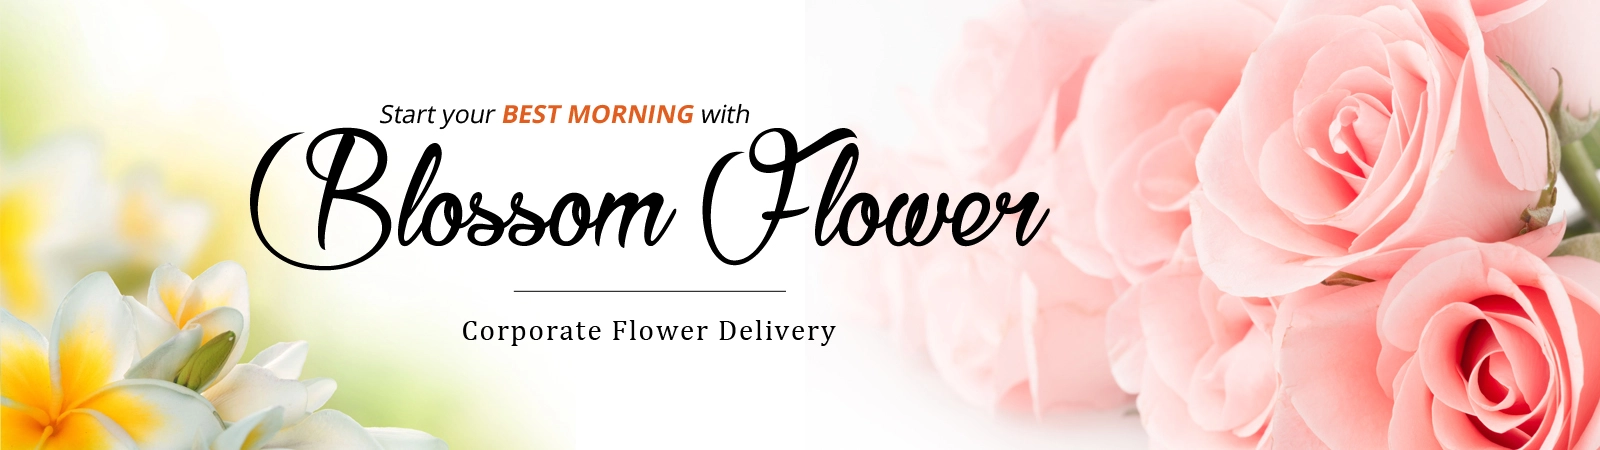 Corporate flower bouquet delivery